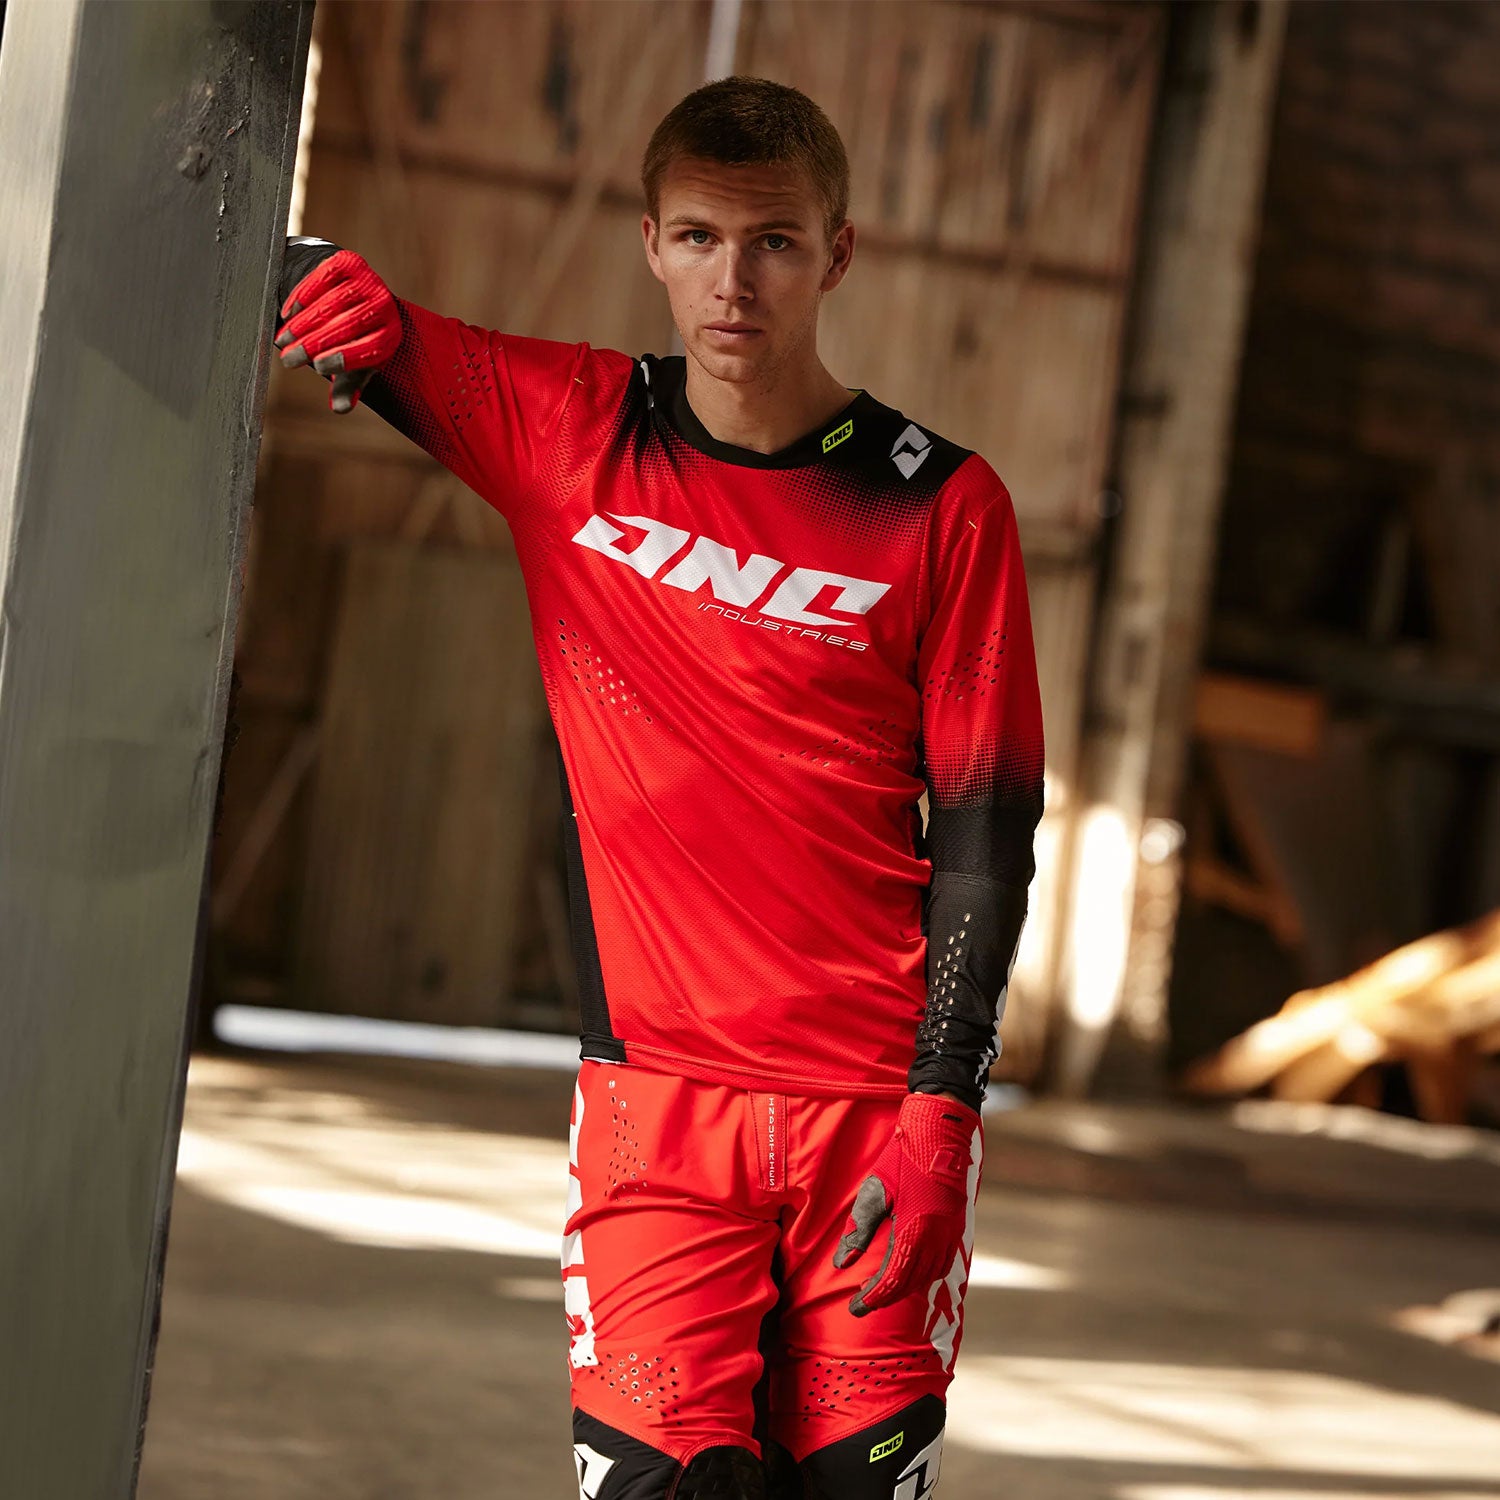 One Industries - X-197 JERSEY - SCORCH RED